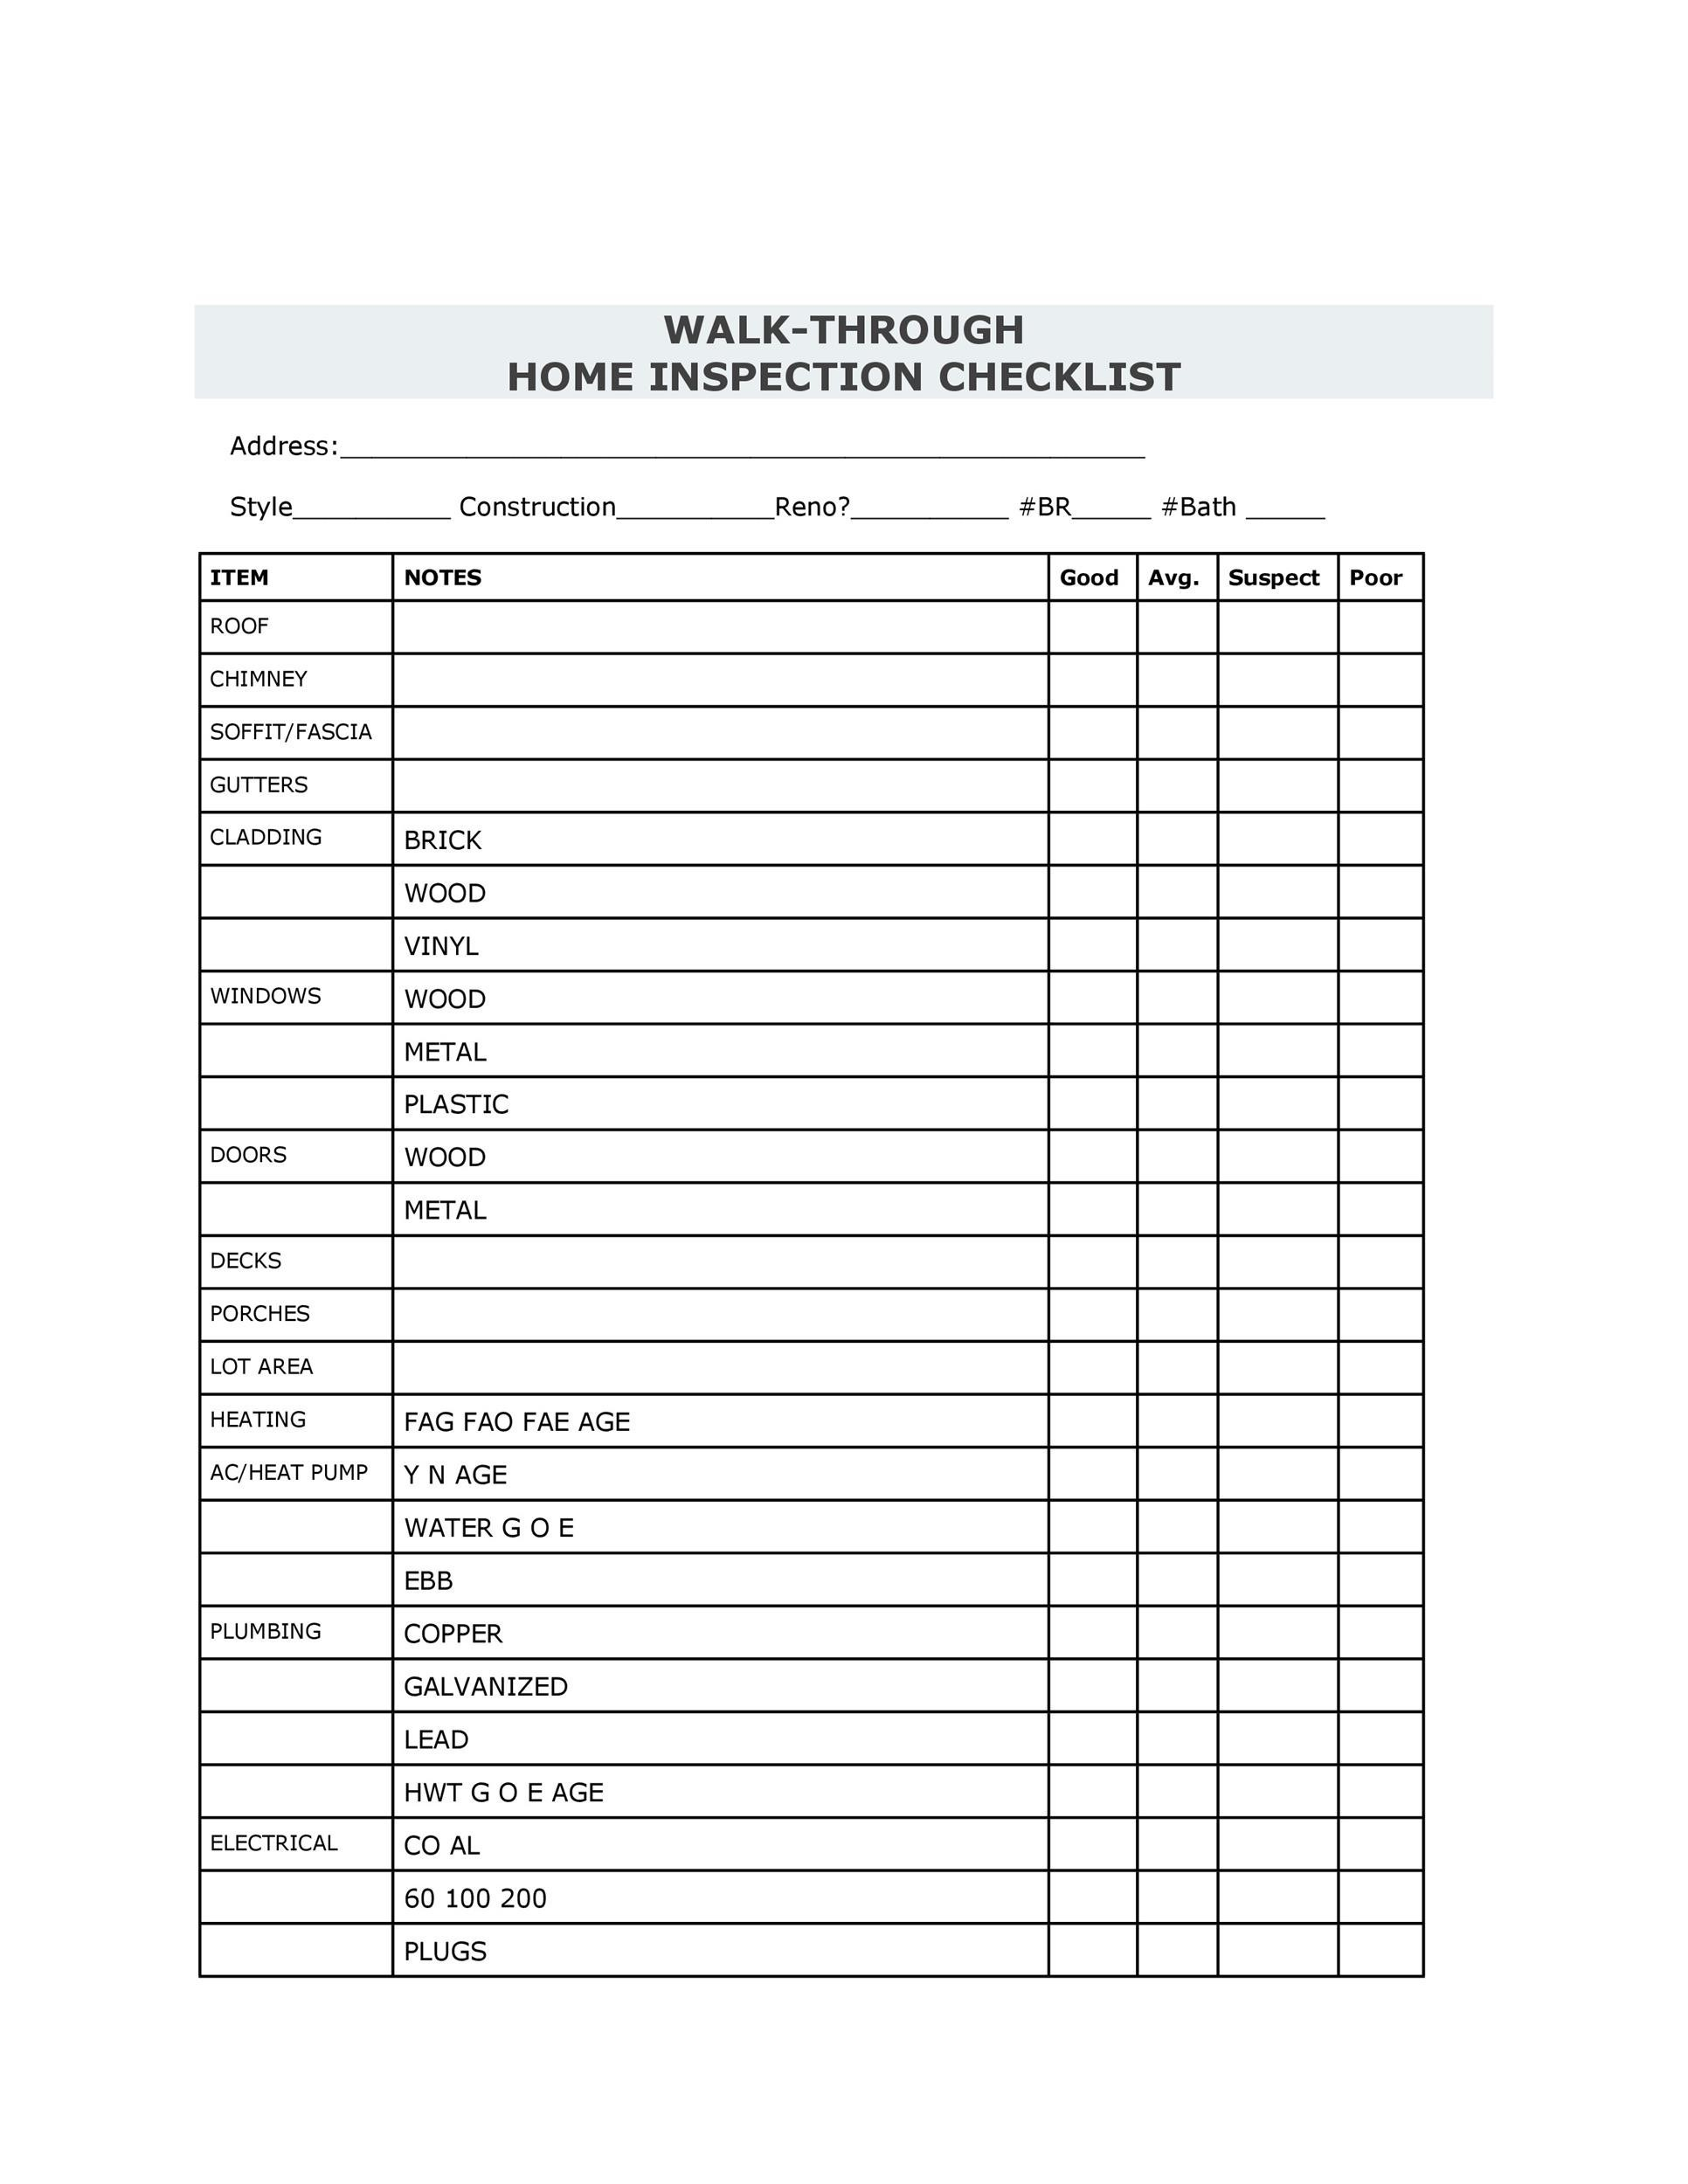 10+ Printable Home Inspection Checklists (Word, PDF) ᐅ TemplateLab Within Building Survey Checklist Template With Regard To Building Survey Checklist Template